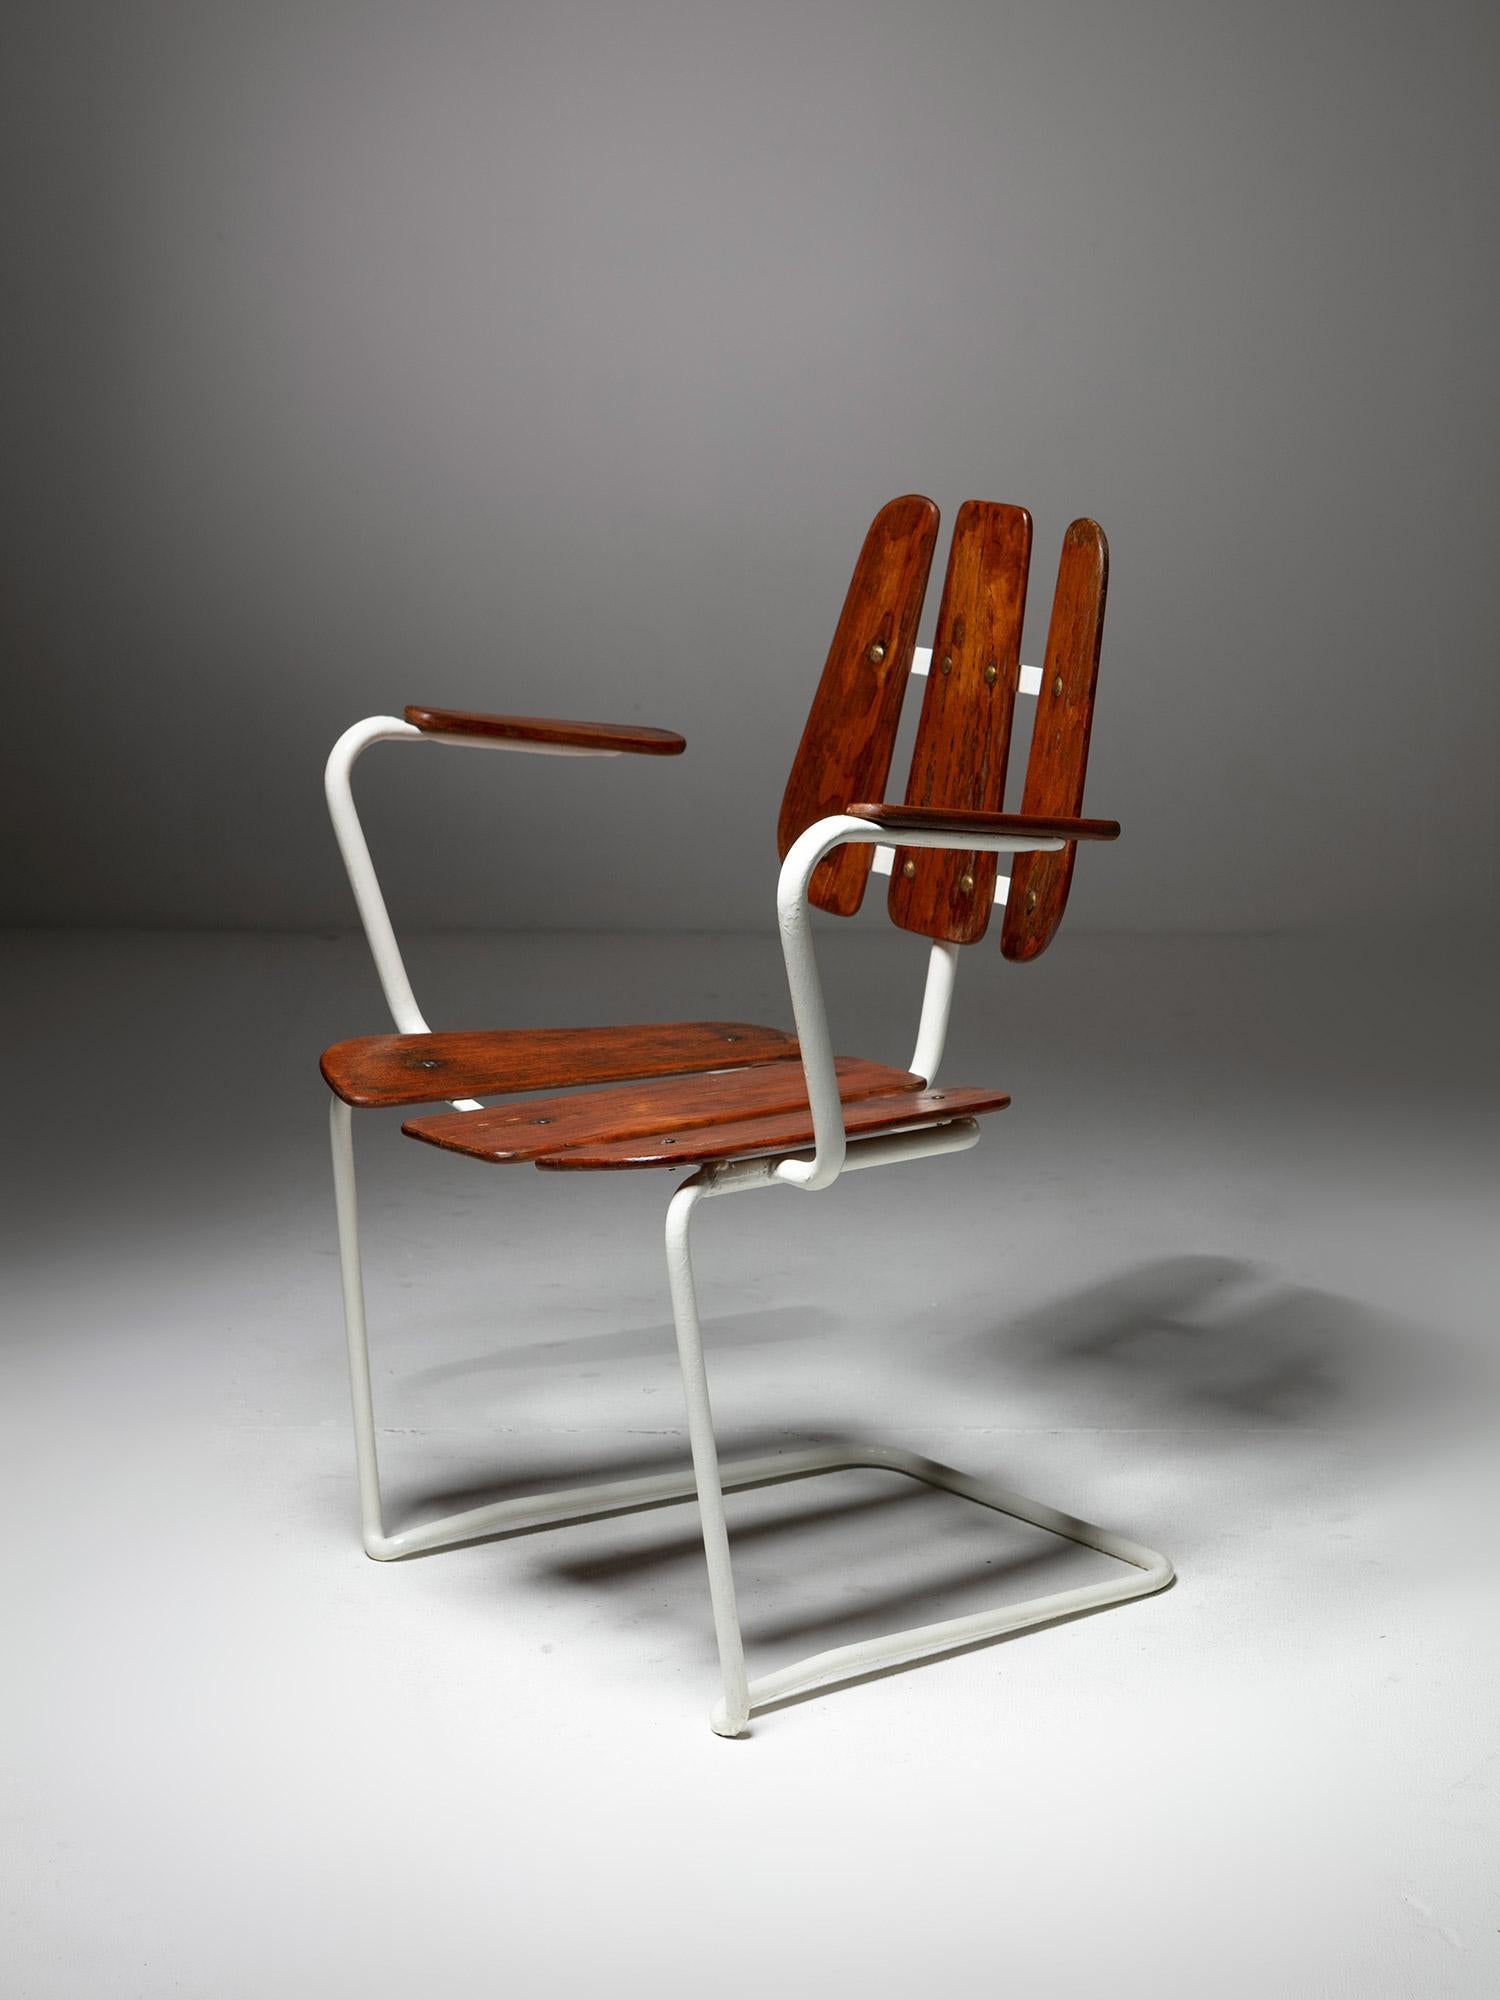 Rare 1950s patio armchair featuring a white metal frame supporting thin organic-shaped wood slabs.